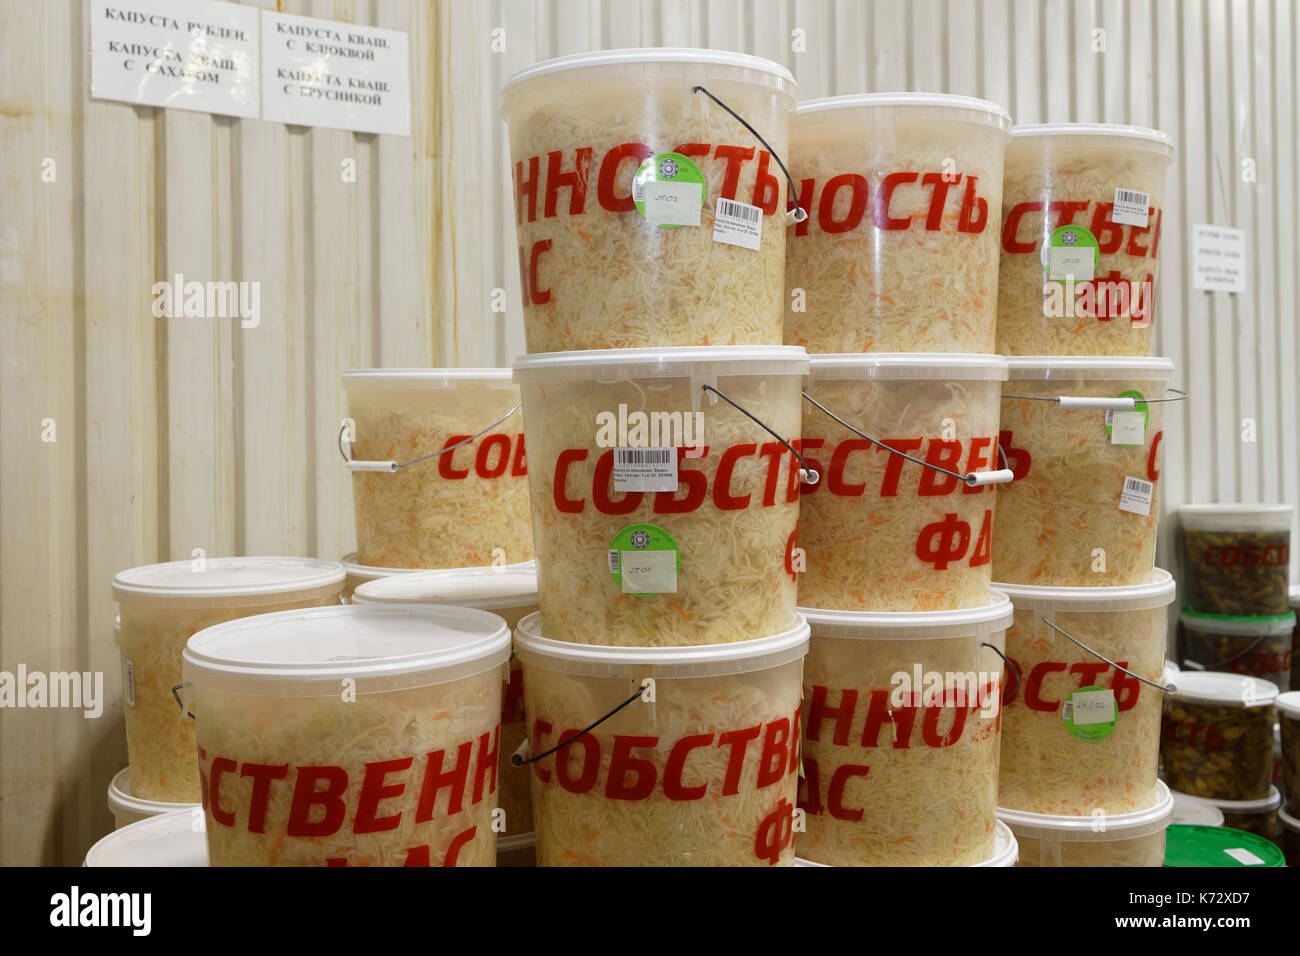 St. Petersburg, Russia - February 28, 2017: Containers with pickled cabbage in a food processing plant. The Factory of Homemade Pickles participates i Stock Photo